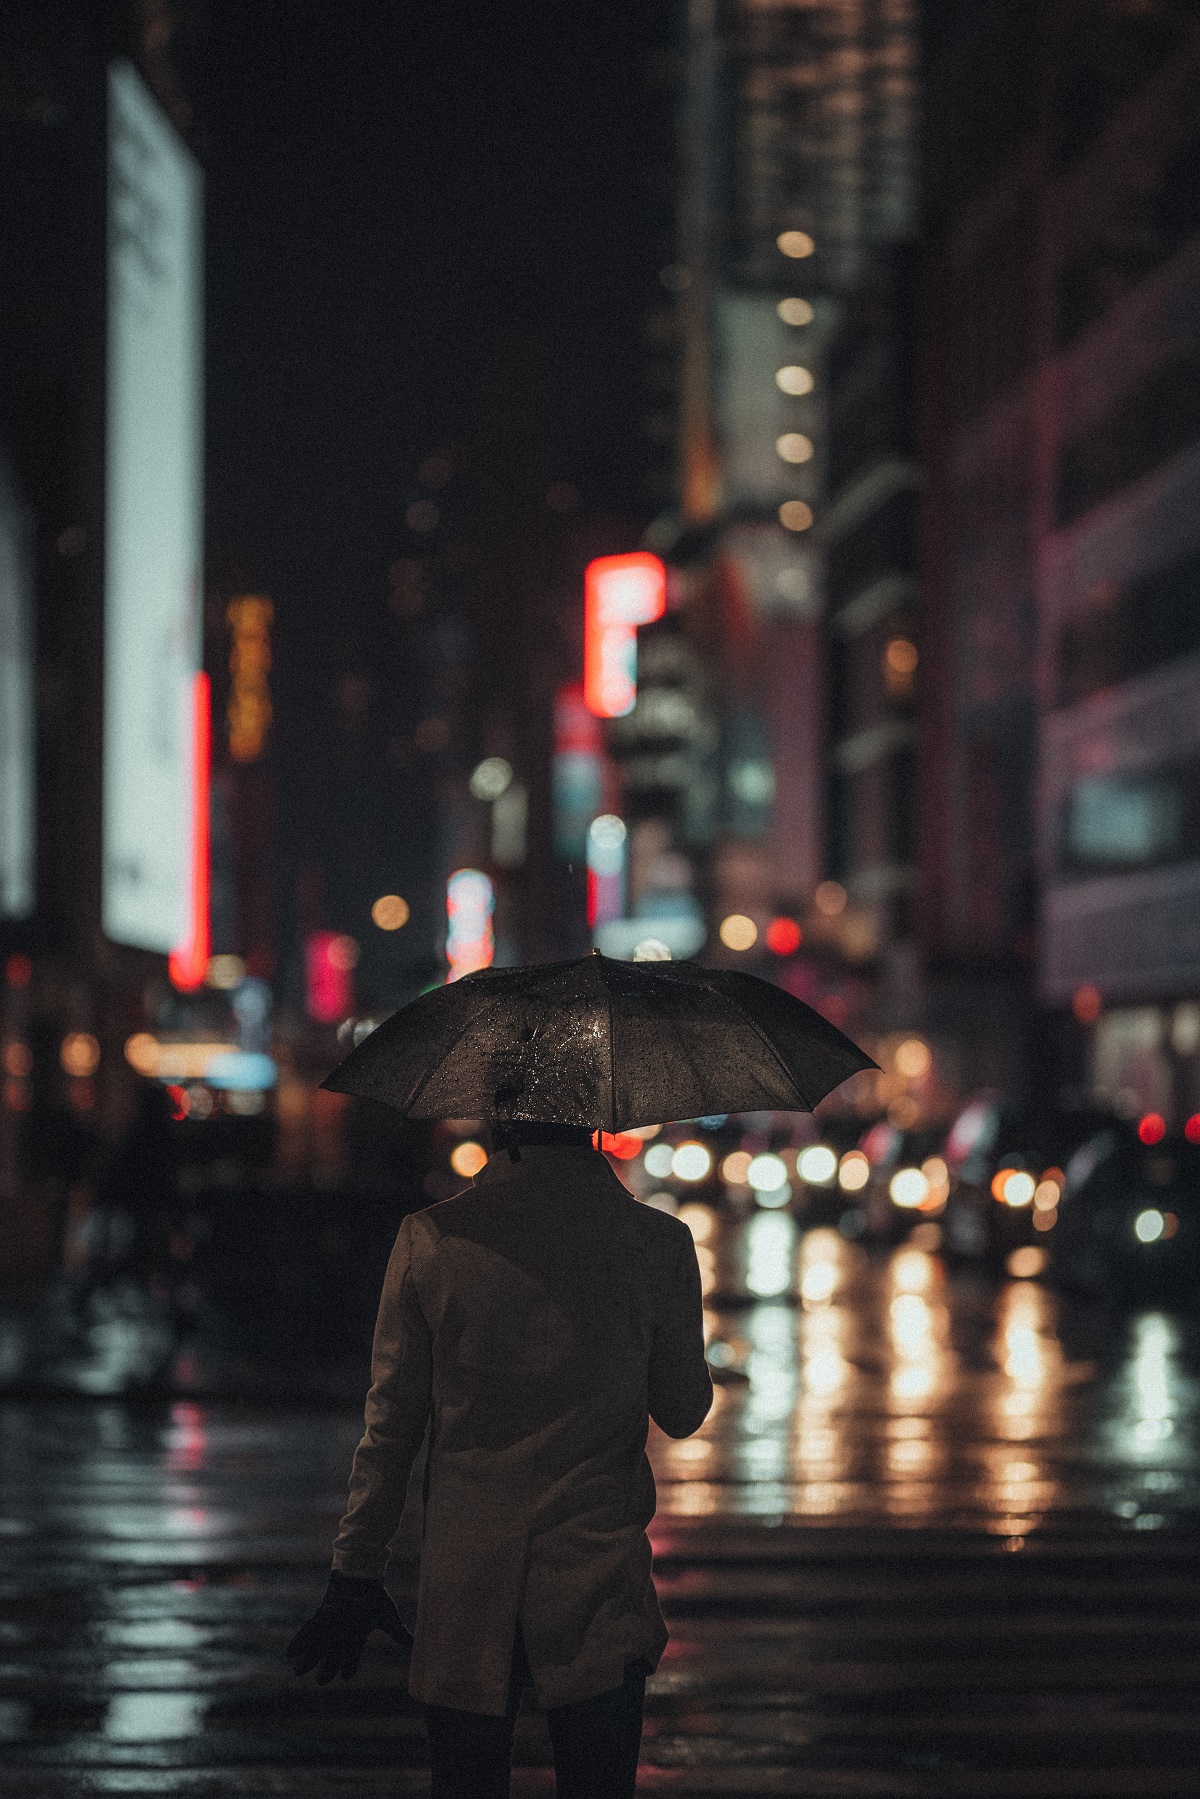 Person walks with an umbrella on a rainy street in a busy city at night